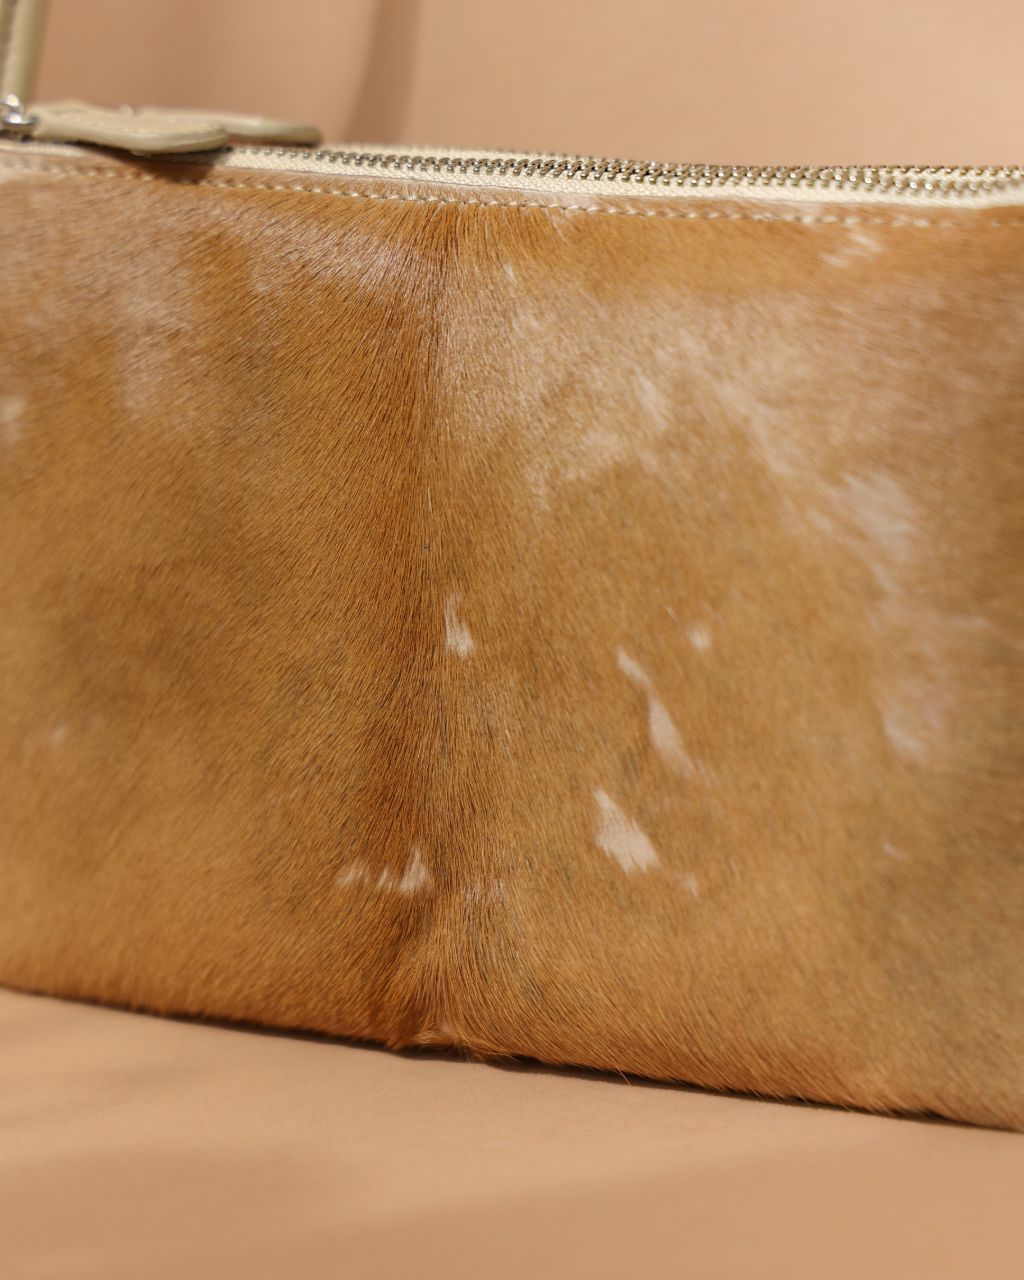 Pony Hair leather crossbody bag in beige TL-14632H_hair leather close up